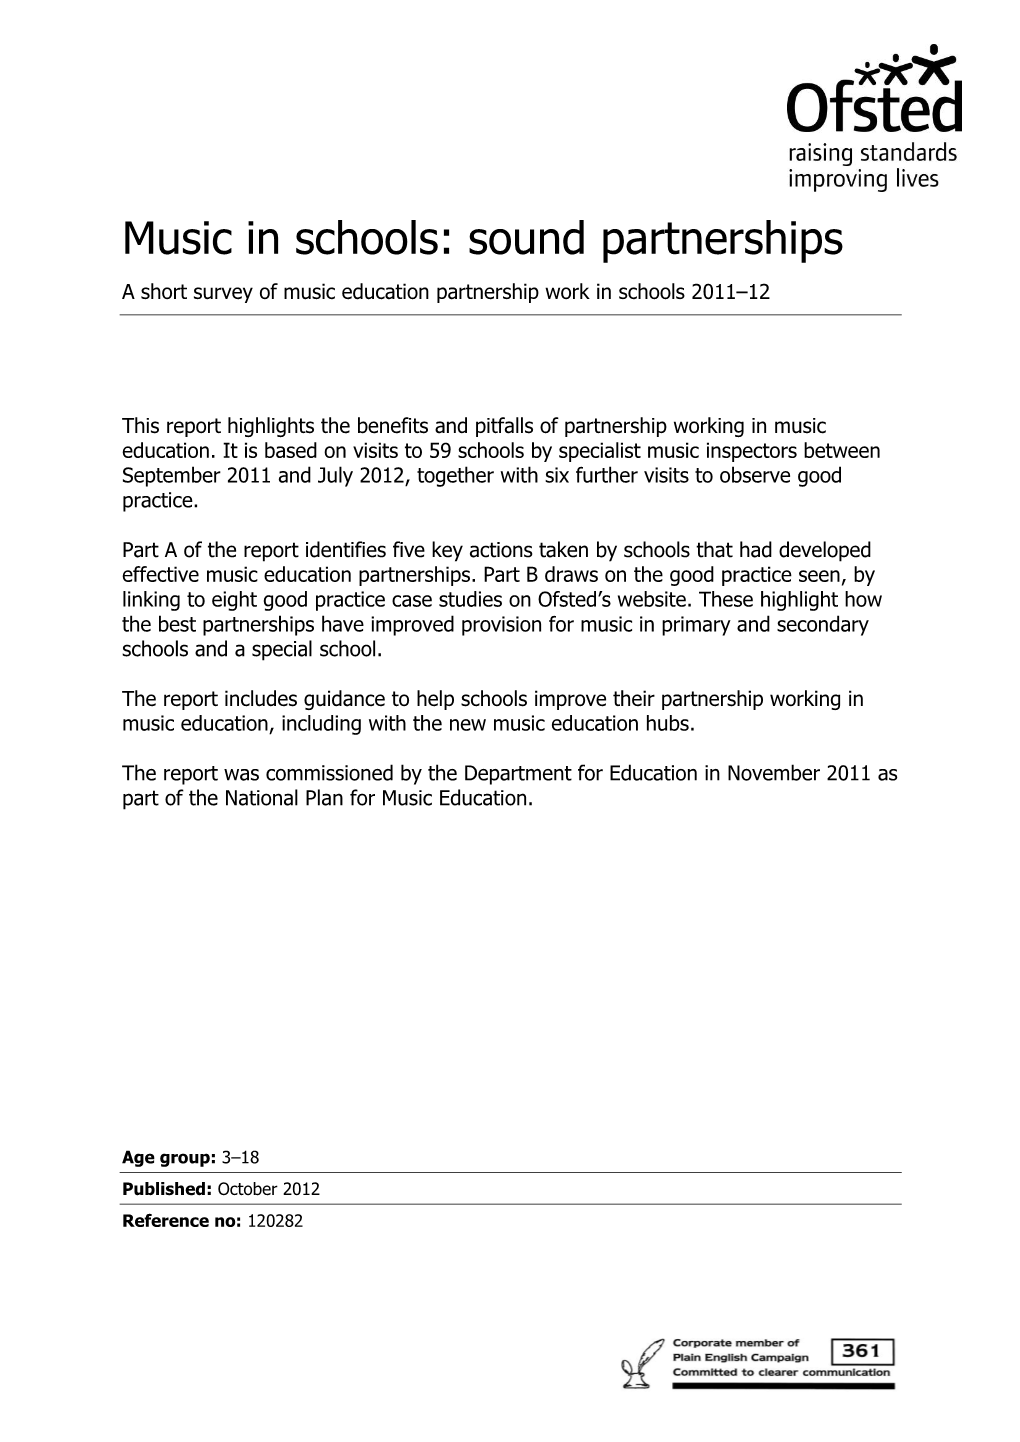 Music in Schools: Sound Partnerships a Short Survey of Music Education Partnership Work in Schools 2011–12